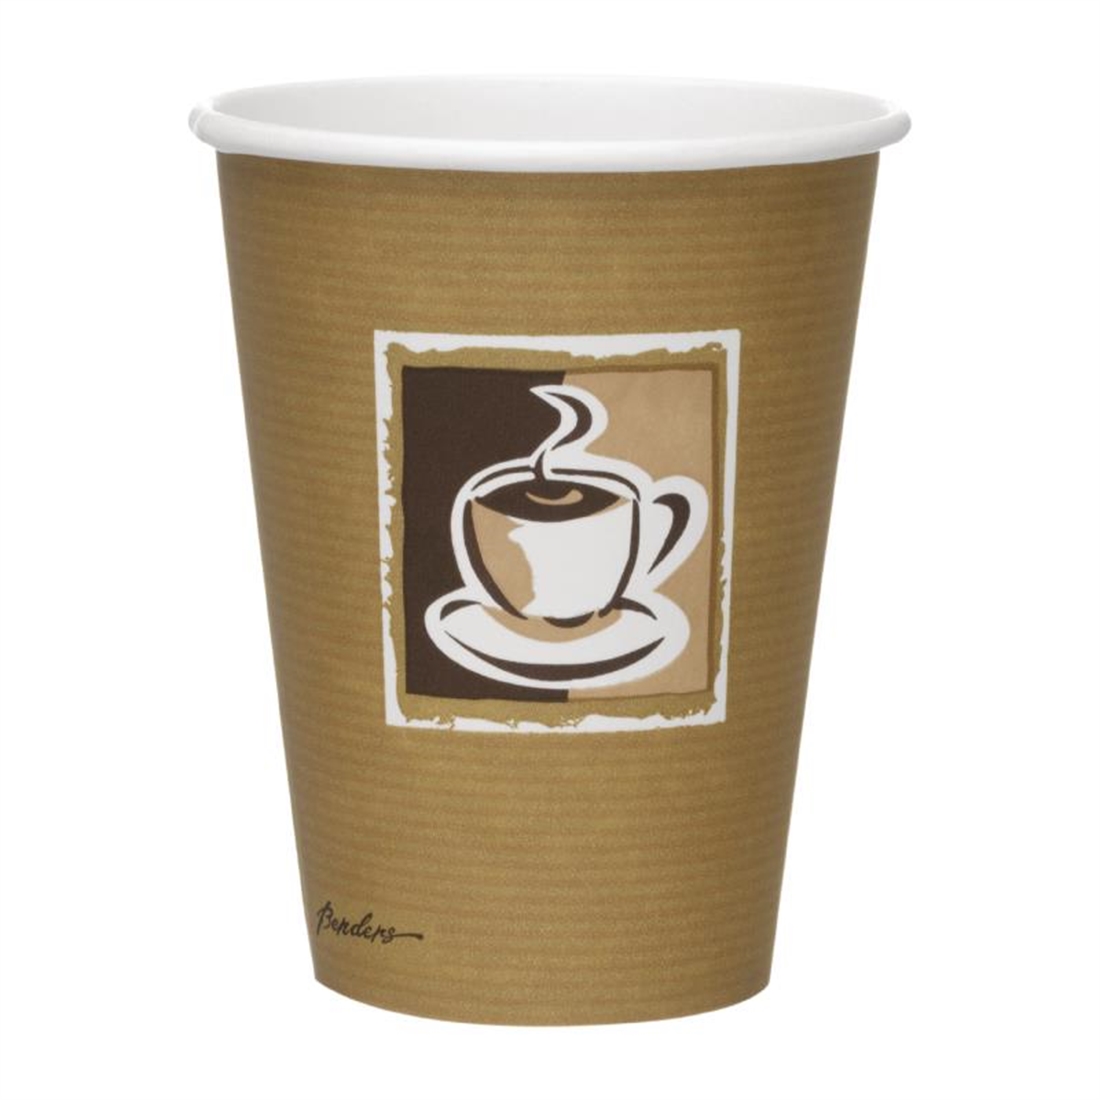 Benders Caffe Disposable Hot Cups 340ml / 12oz